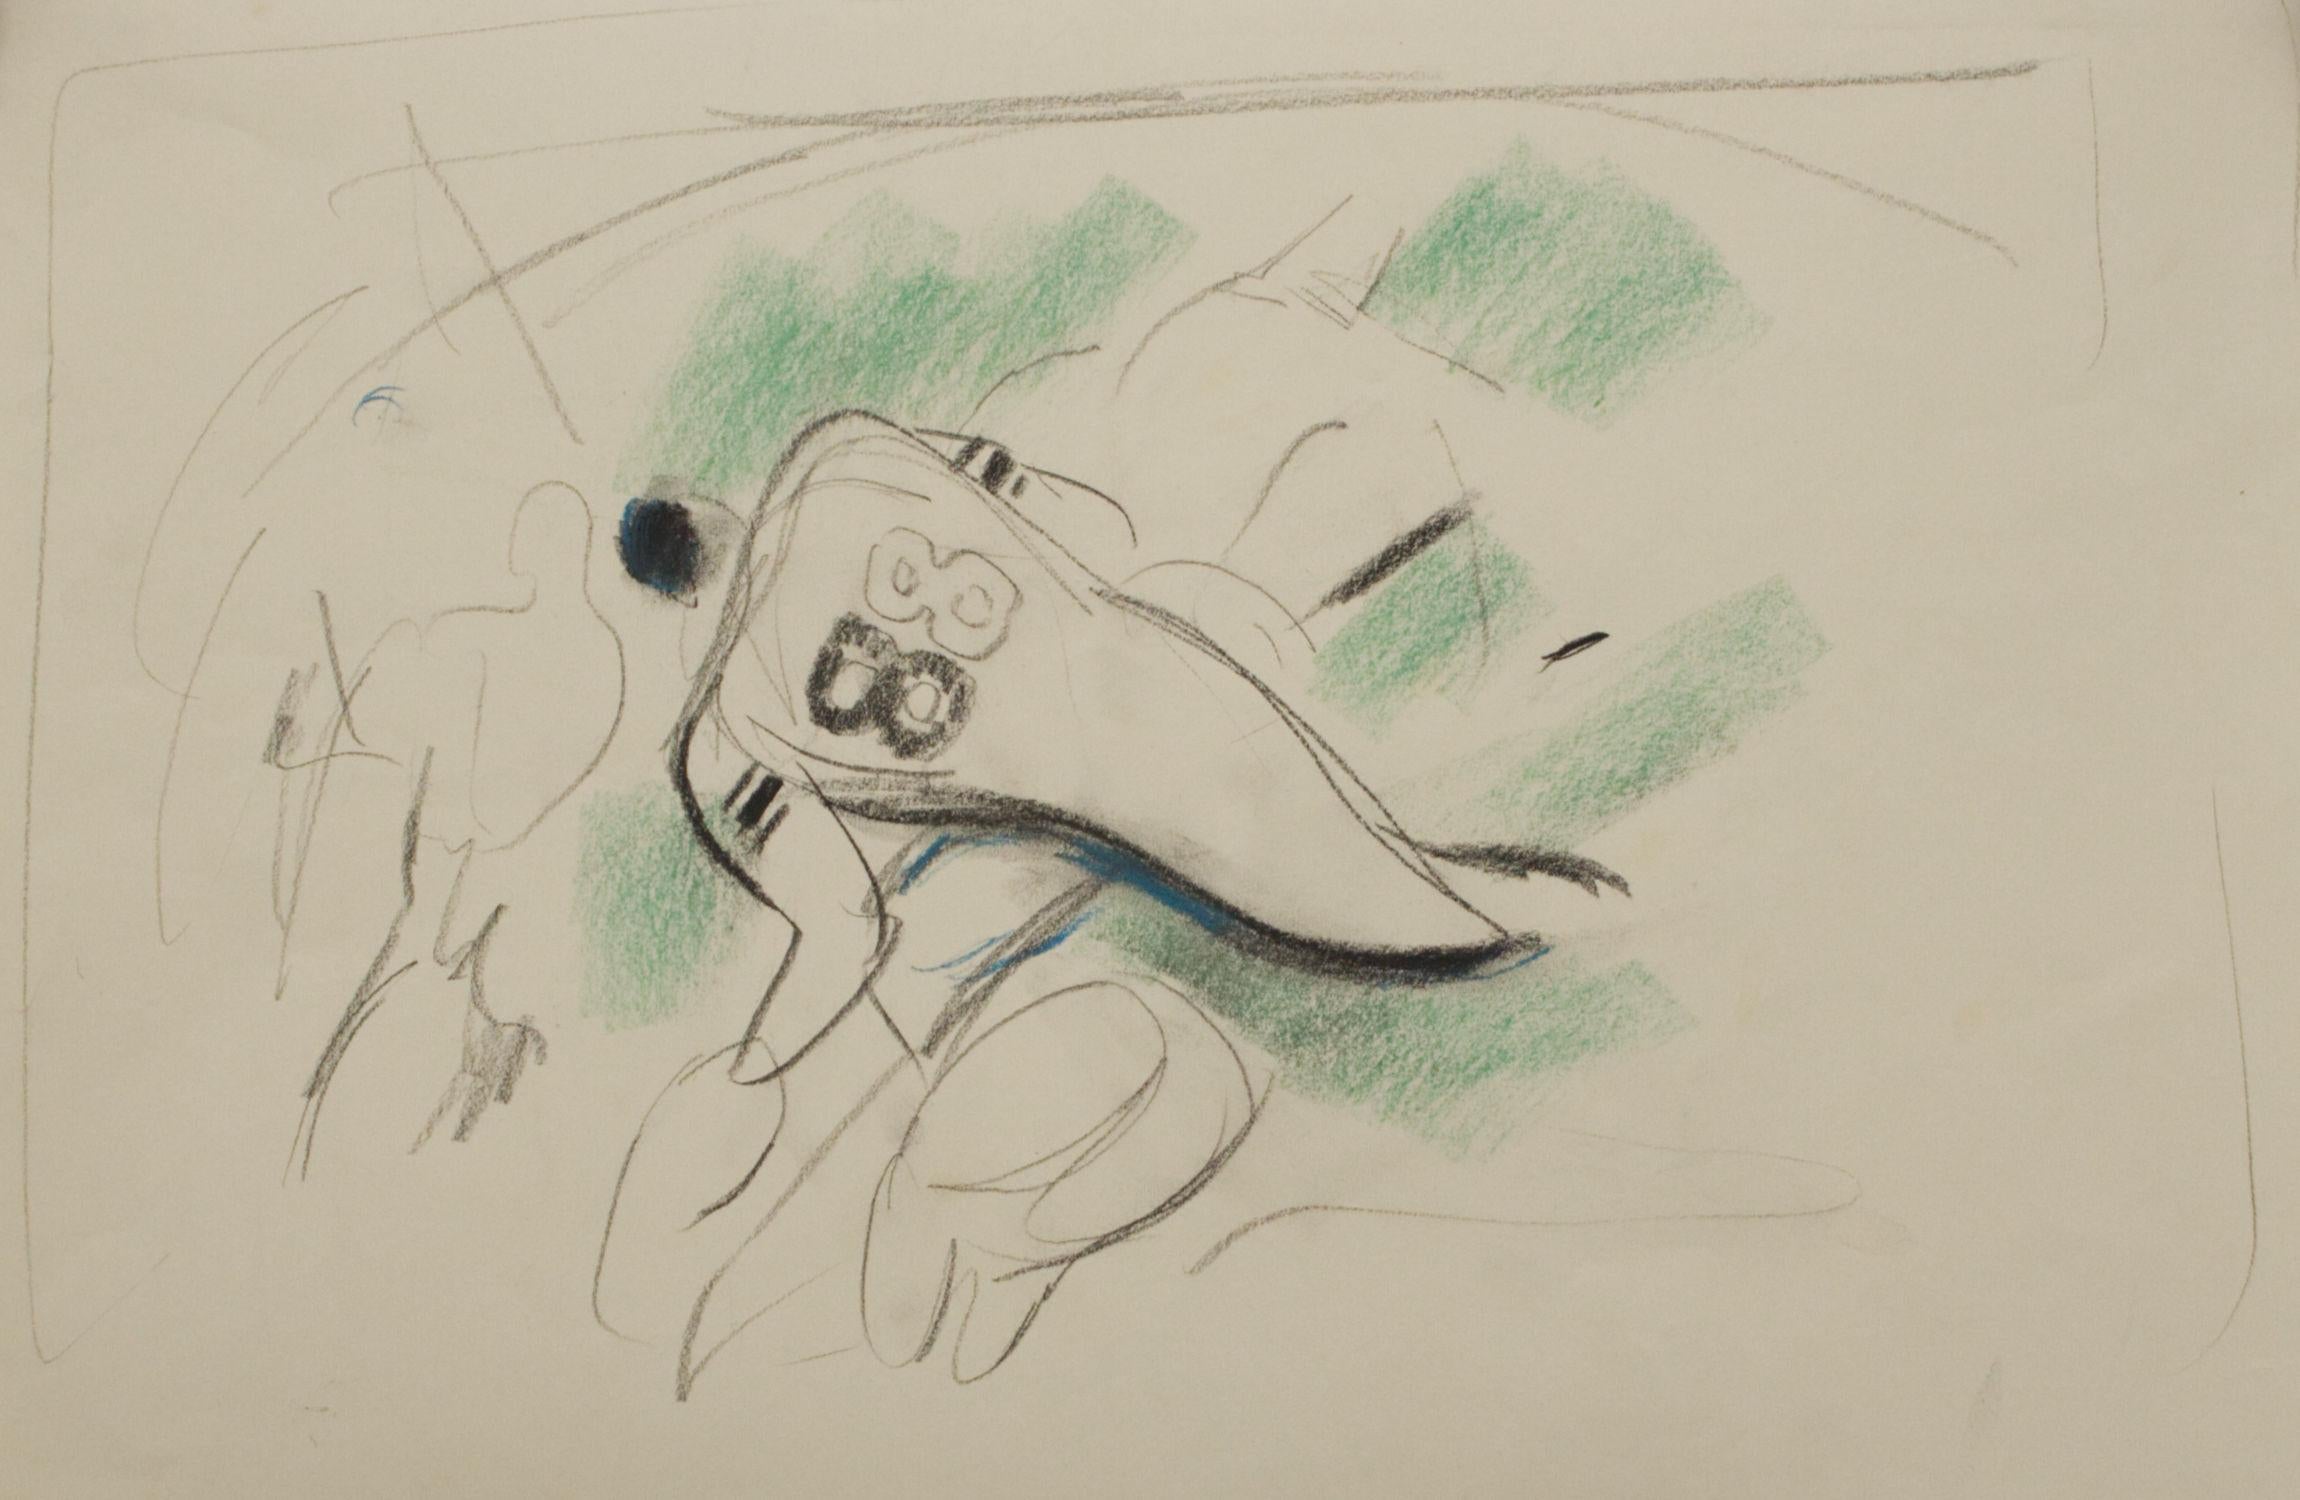 A ca. 1954, drawing of a Notre Dame Football Game by Artist Francis Chapin